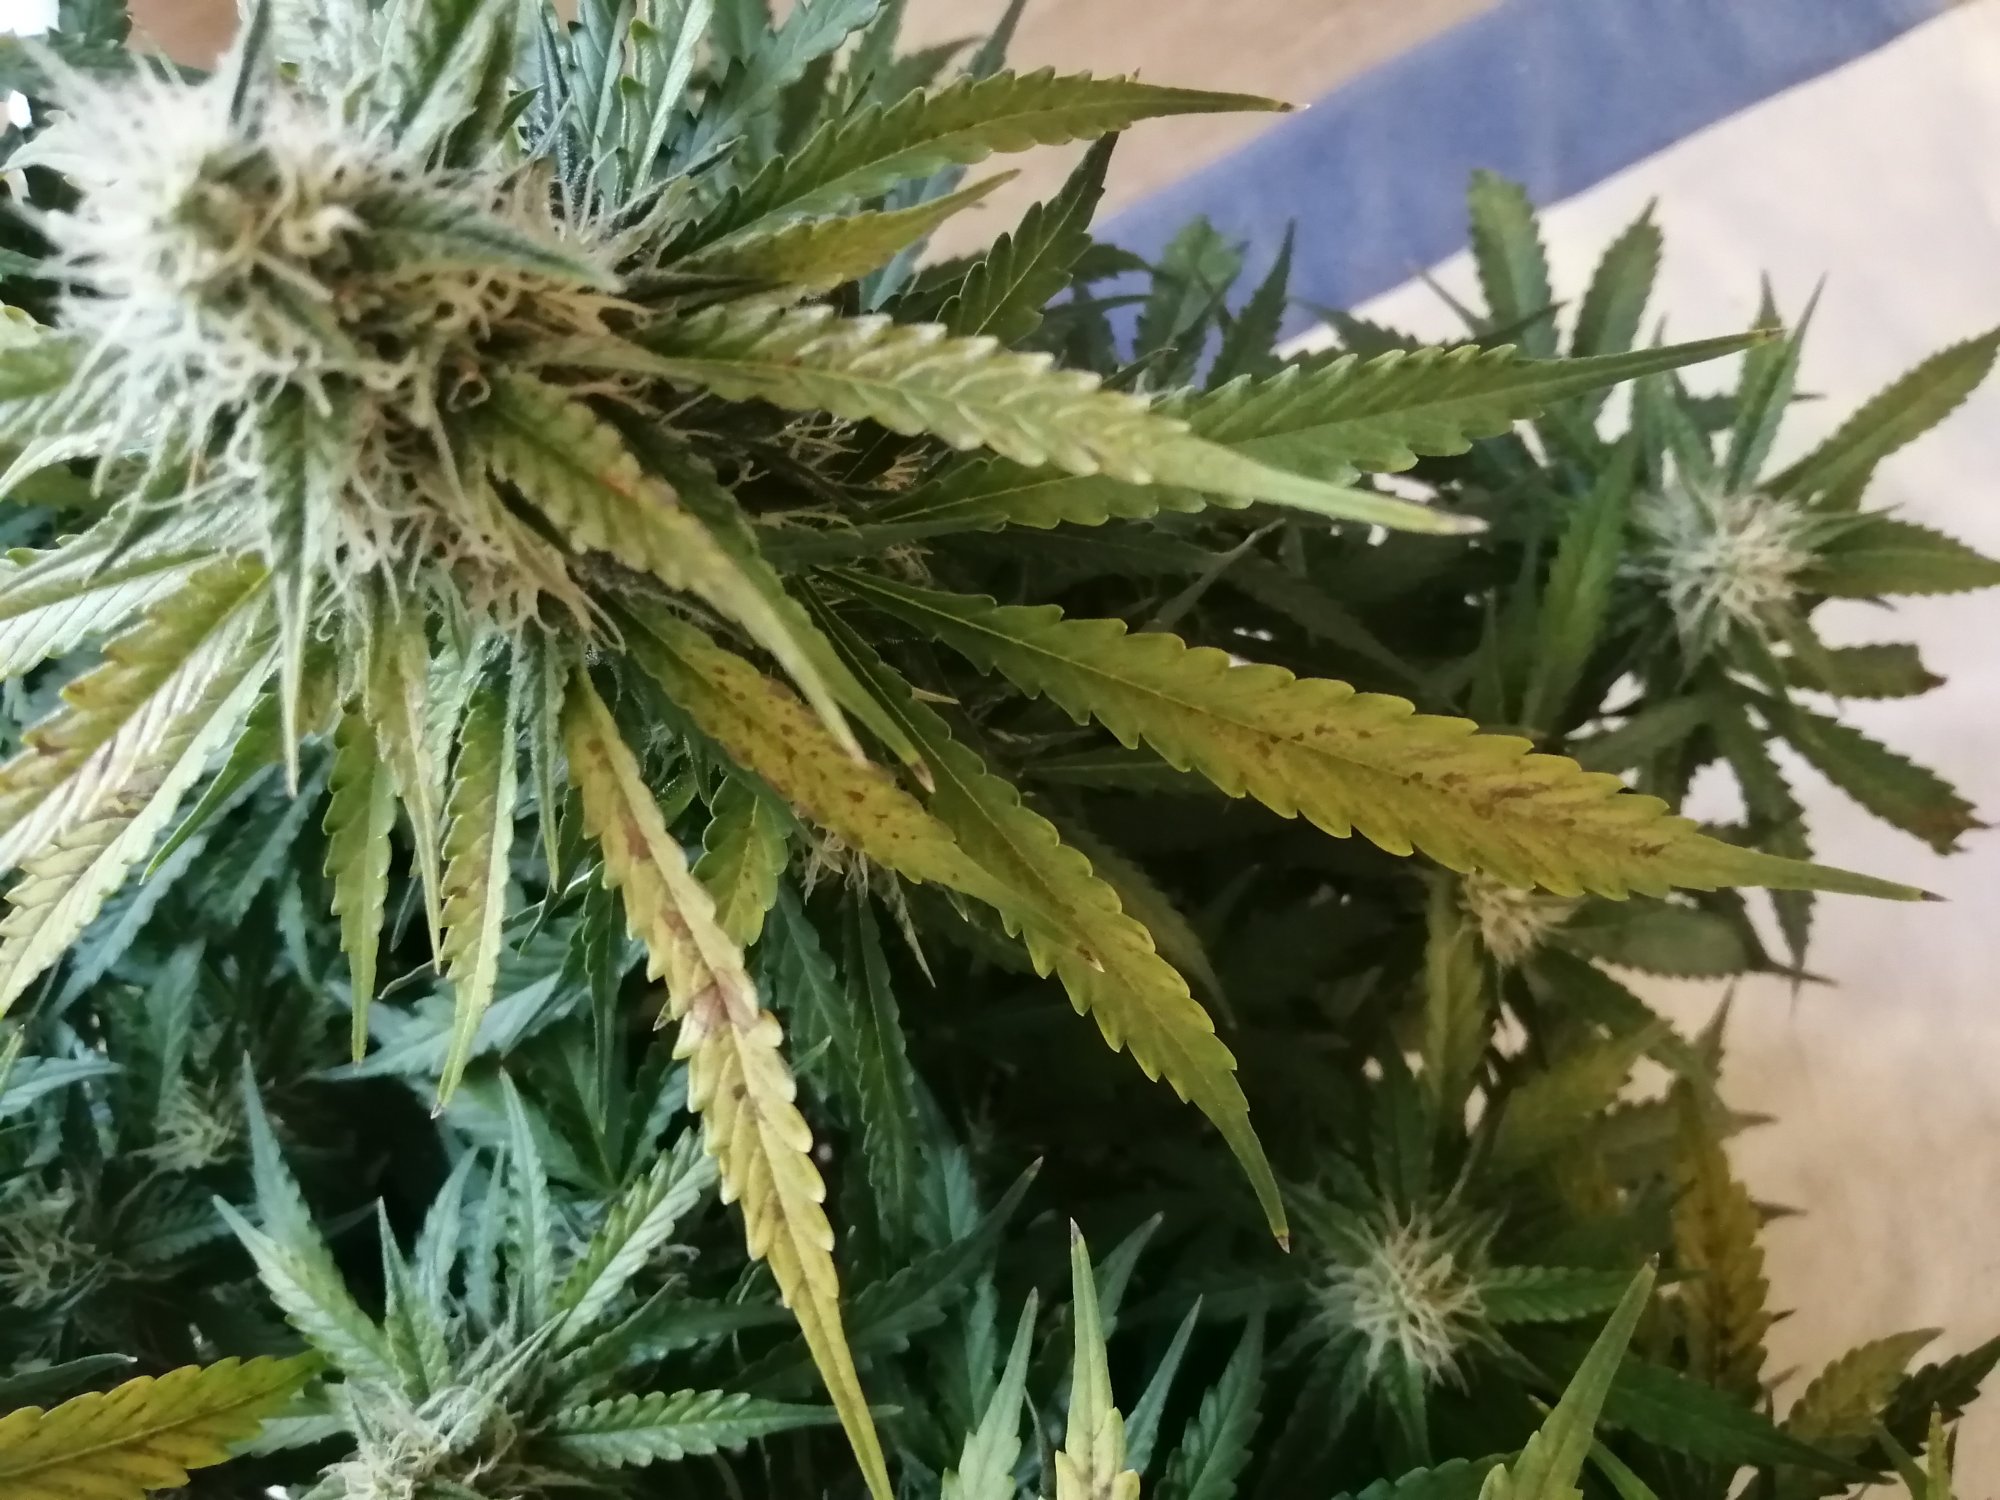 Urgent help needed is this calcium deficiency or lockout or anything else